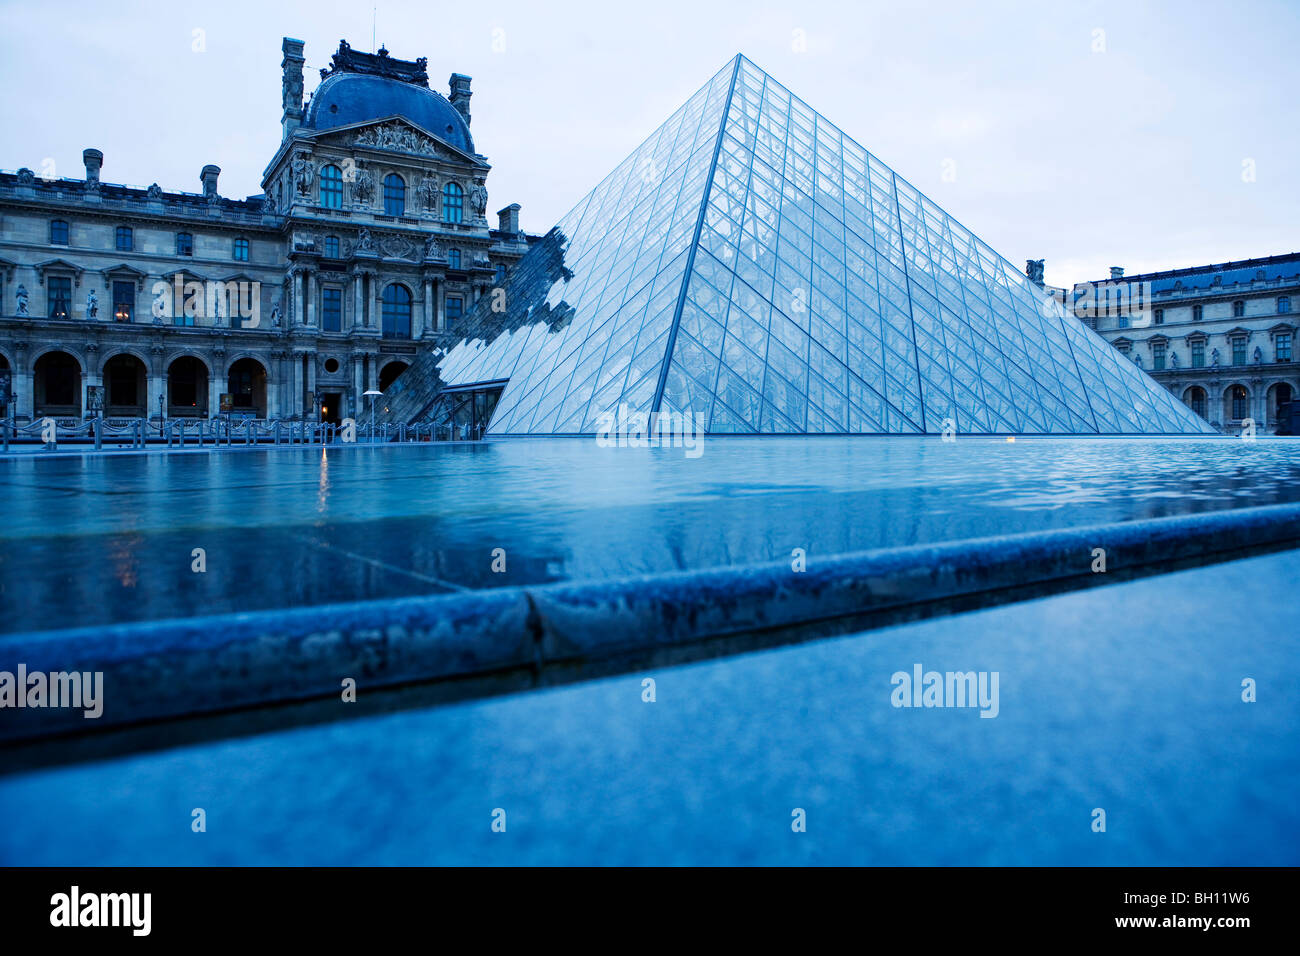 The Louvre museum with the Louvre Pyramid, Paris, France Stock Photo